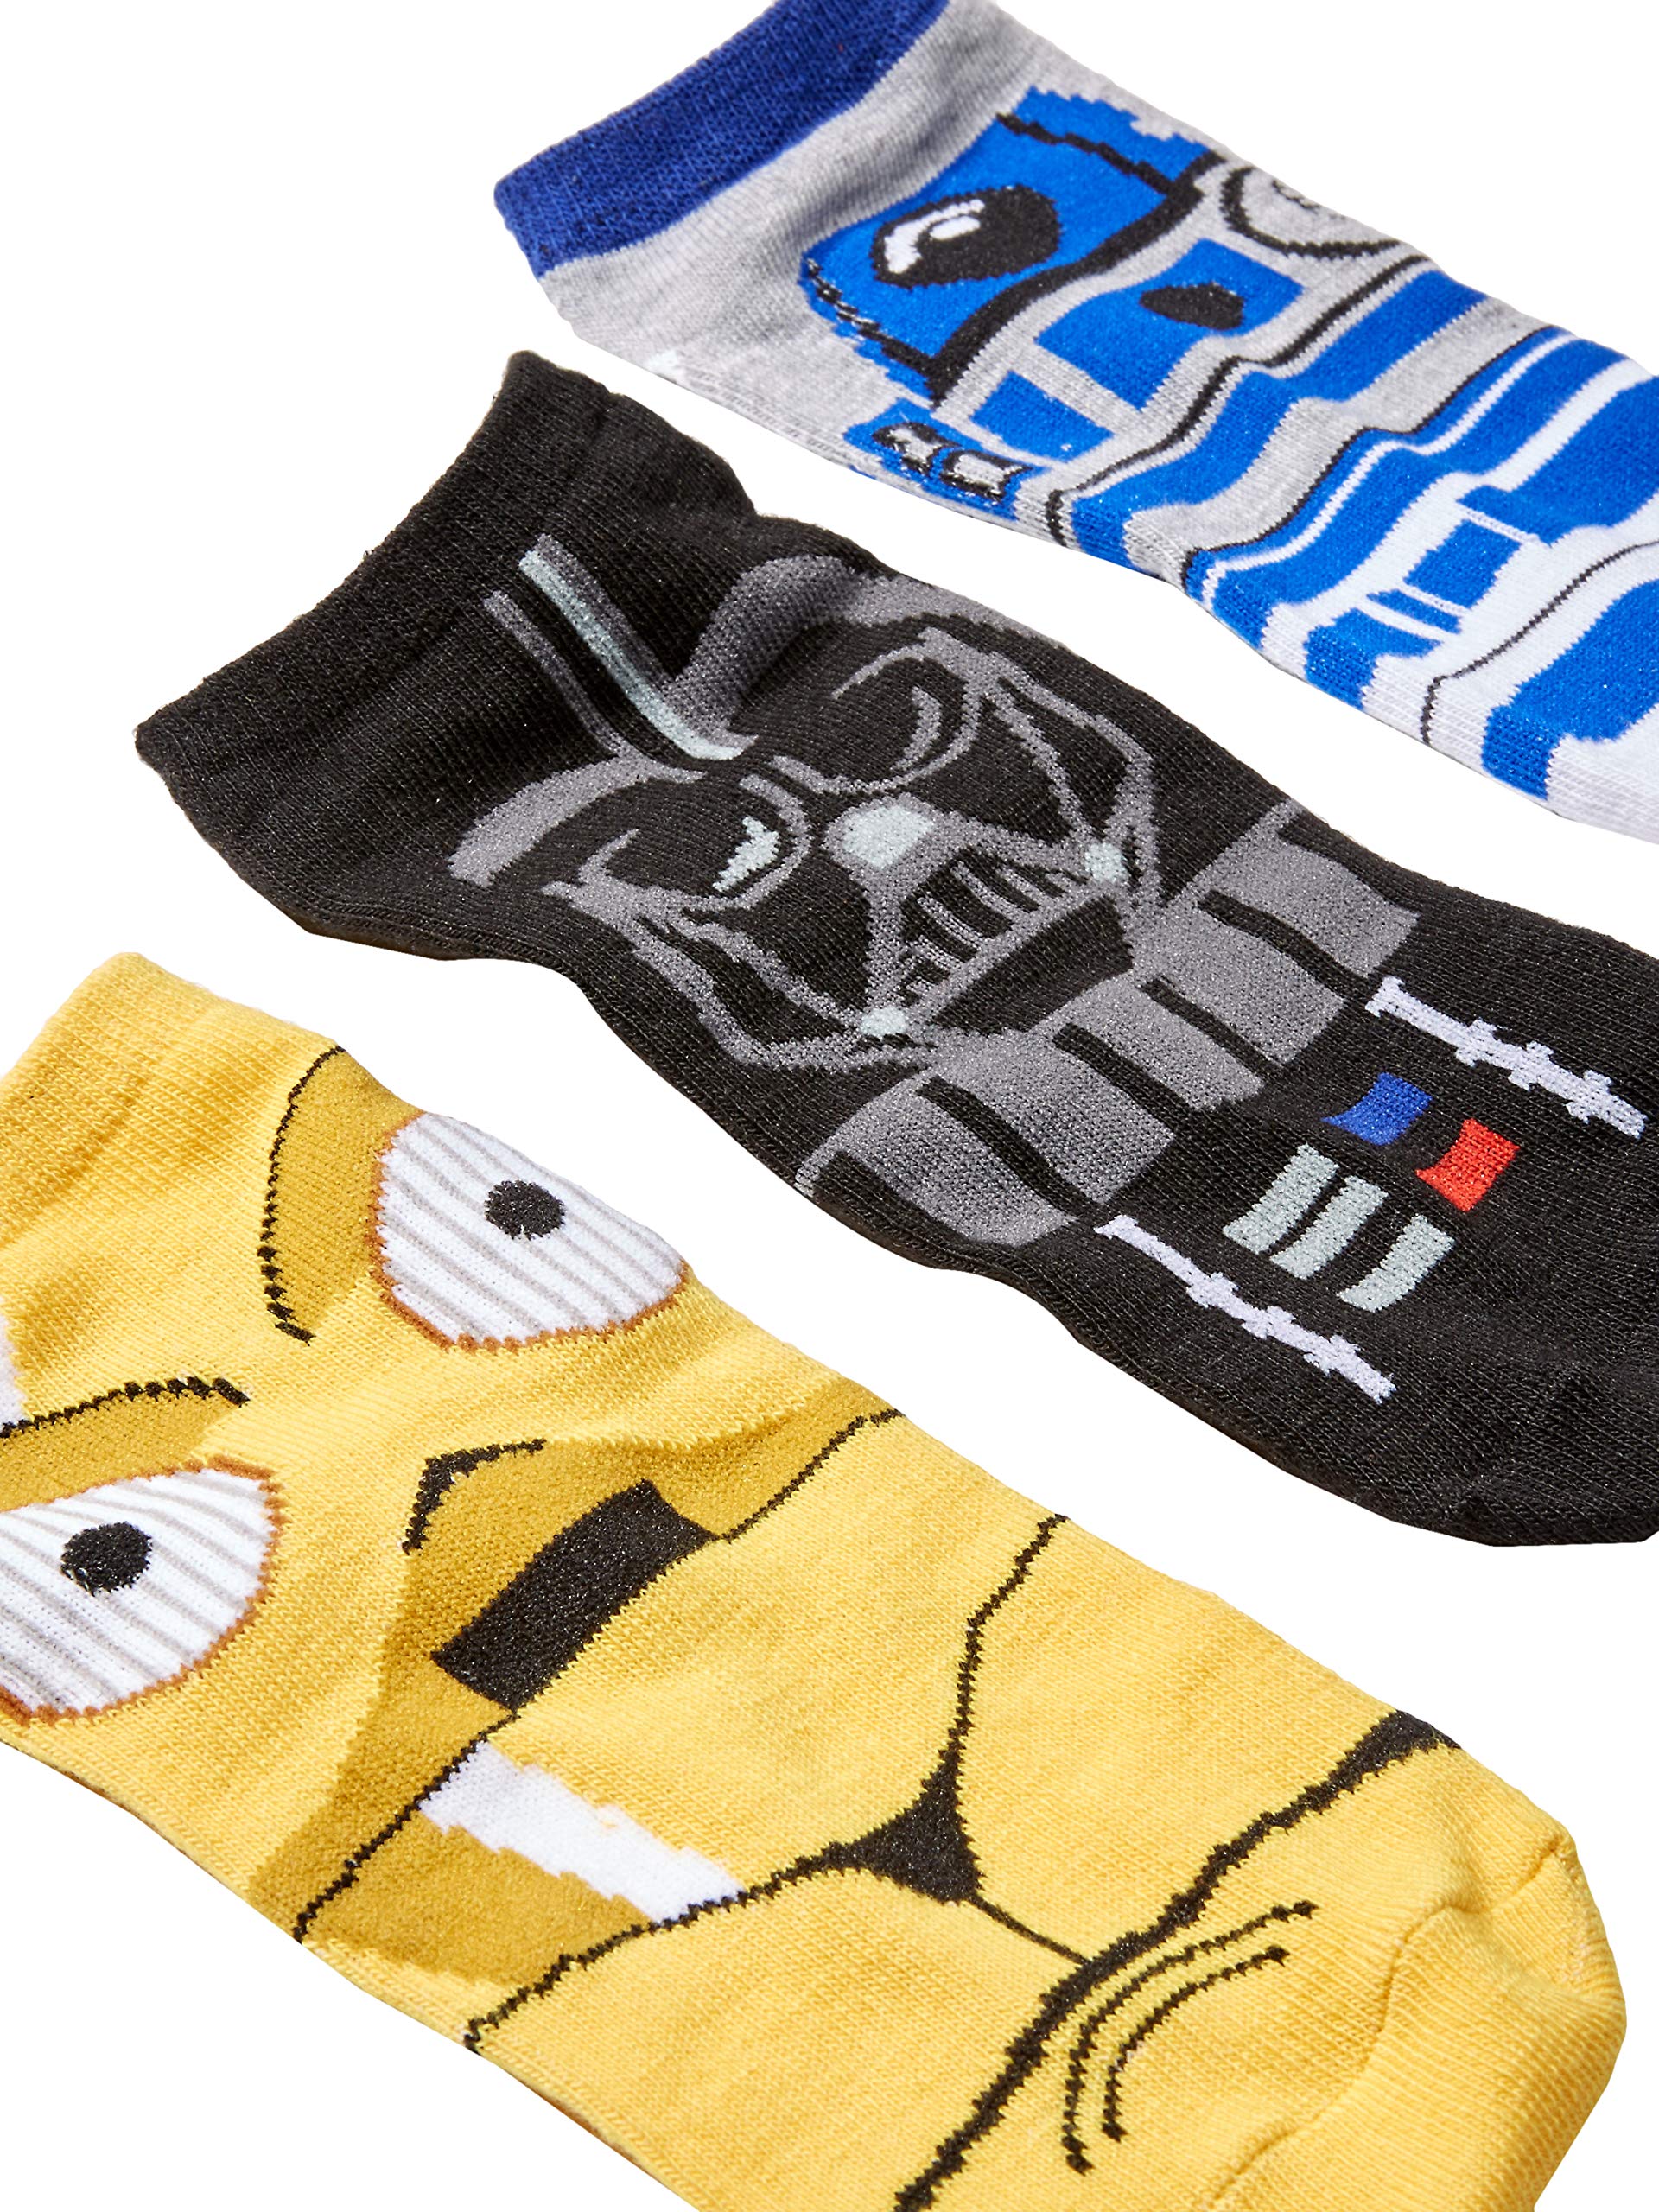 STAR WARS Chewbacca Darth Vader R2-D2 Faces 5 Pack Ankle Socks